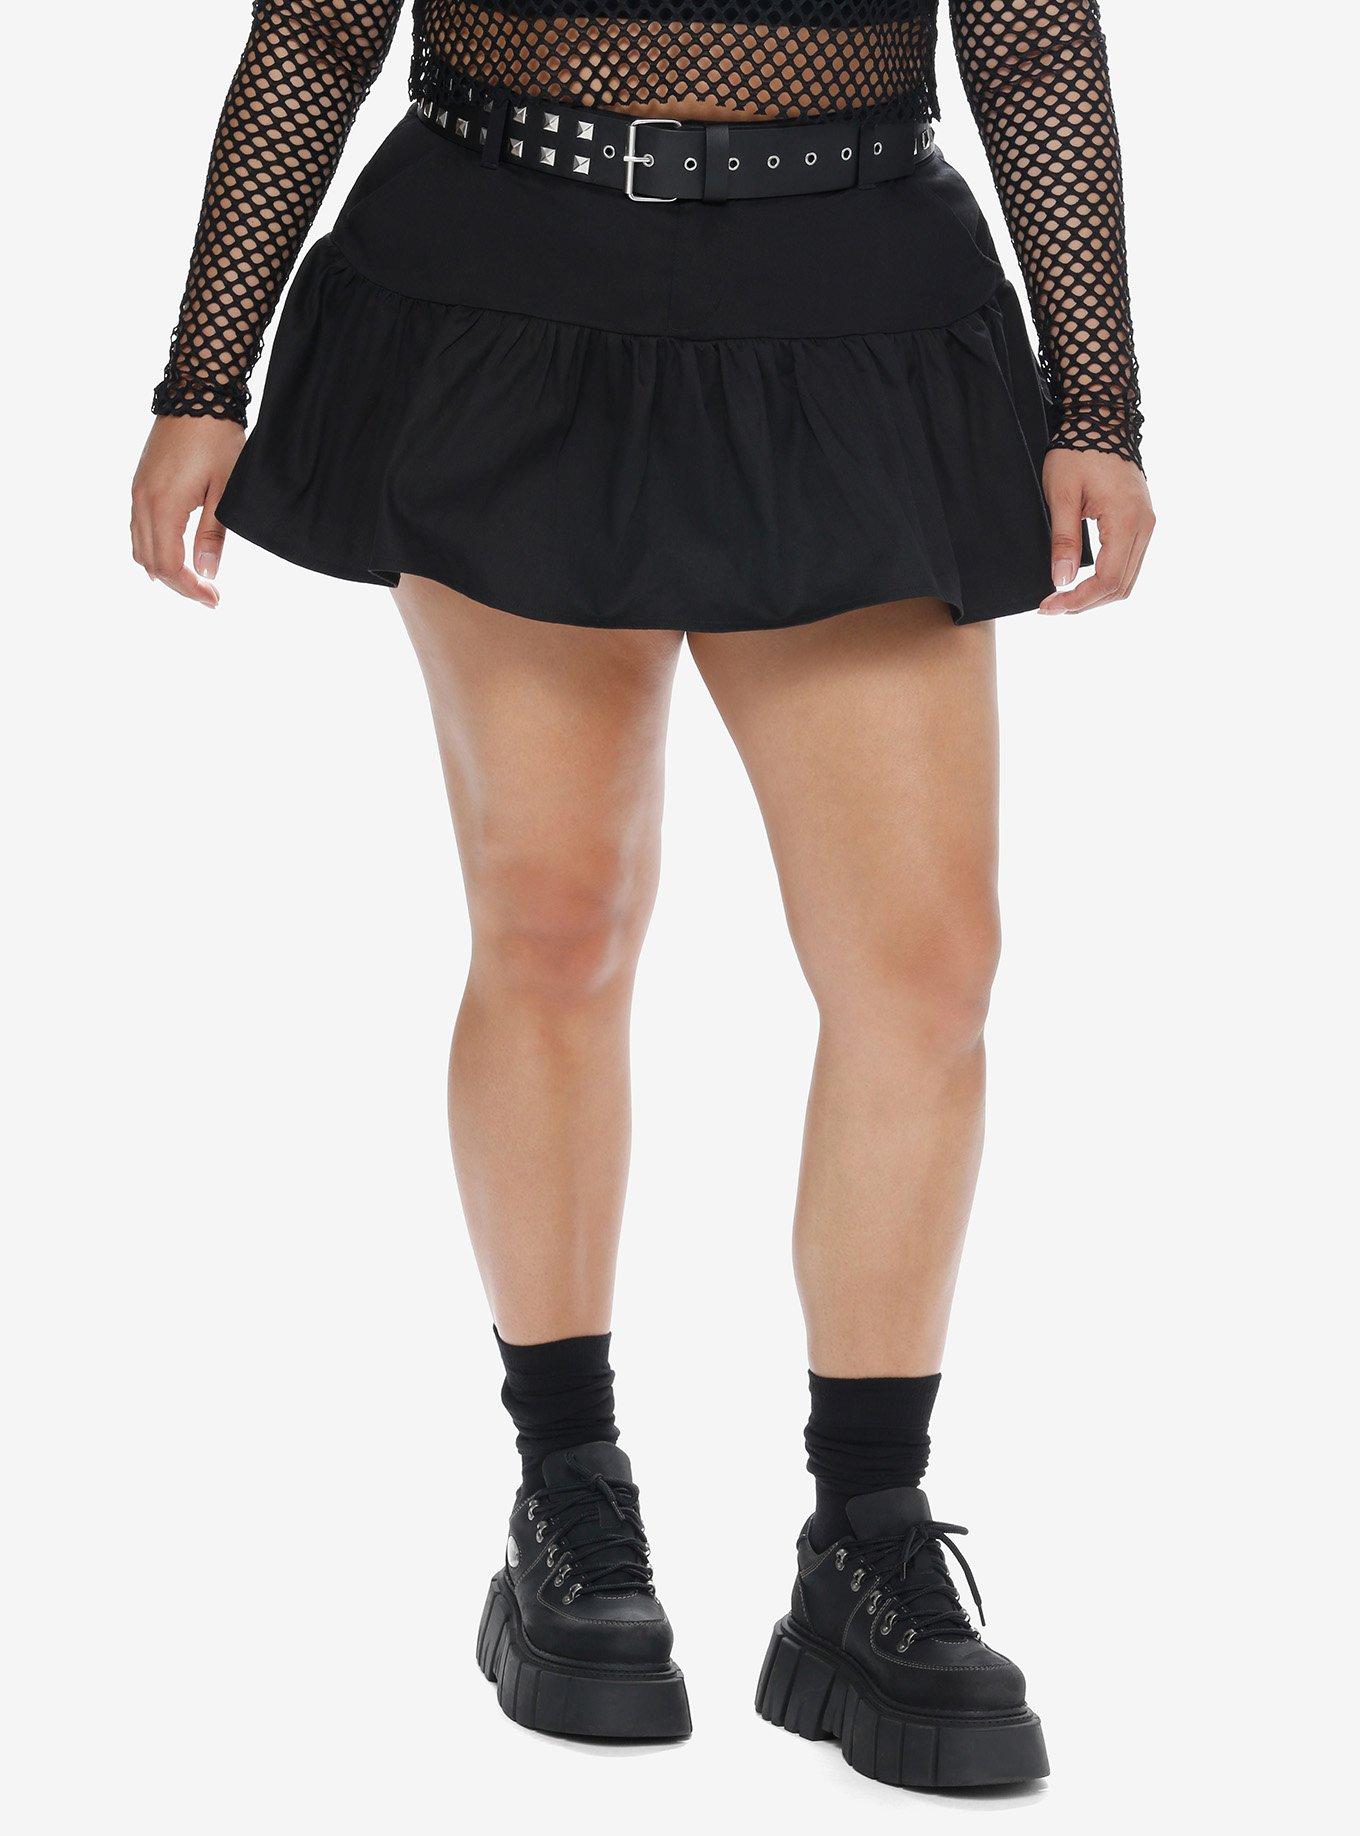 Social Collision Black Ruffle Skirt With Belt Plus Size, SILVER, hi-res